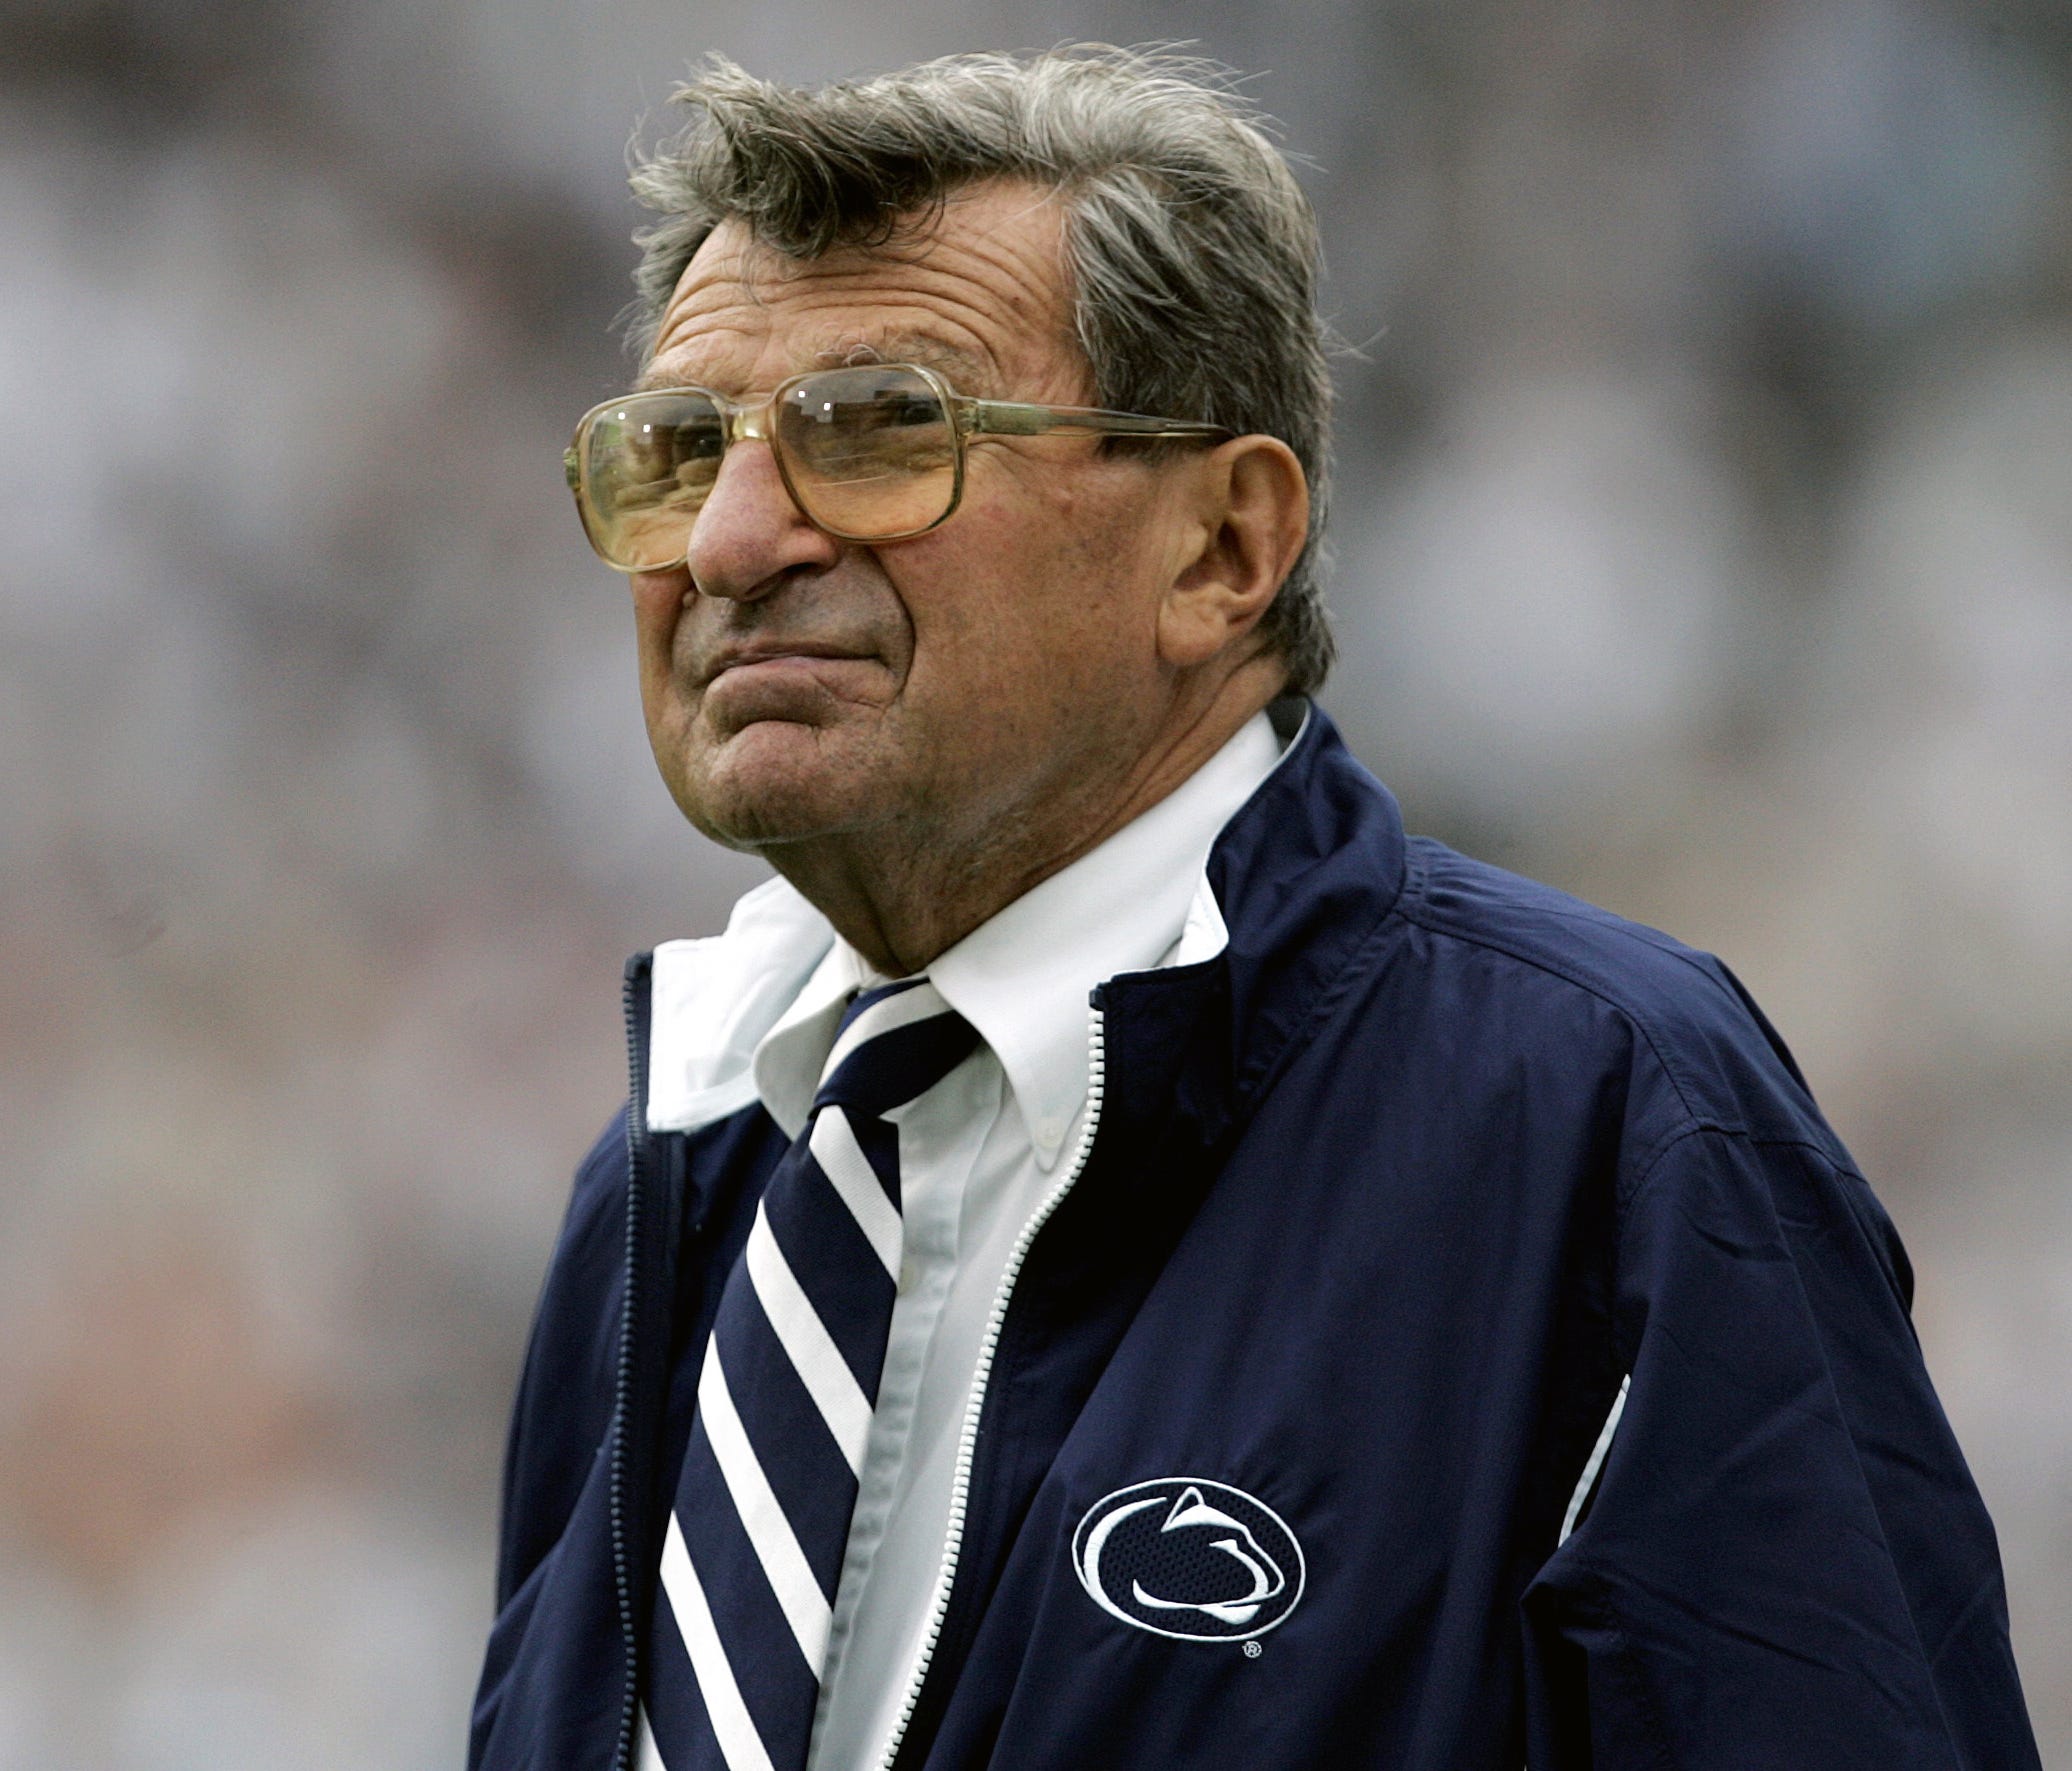 White House communications director Anthony Scaramucci referenced the late Joe Paterno during an interview on Thursday.